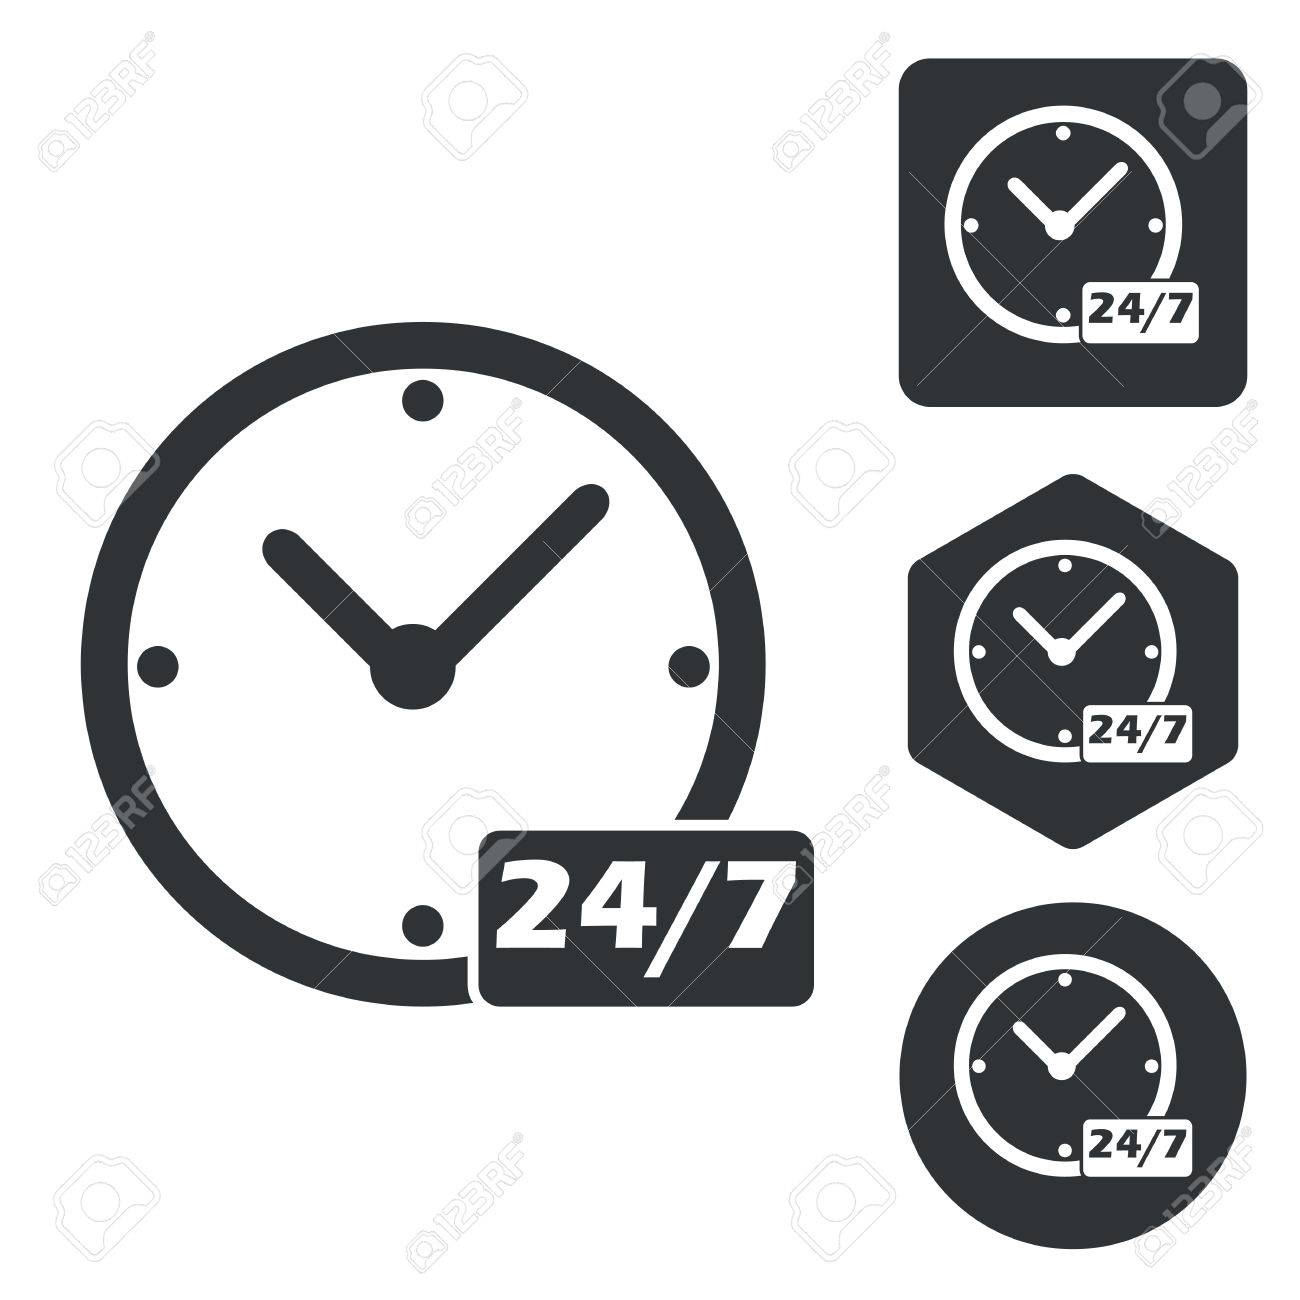 563 Overnight Icon Stock Vector Illustration And Royalty Free 